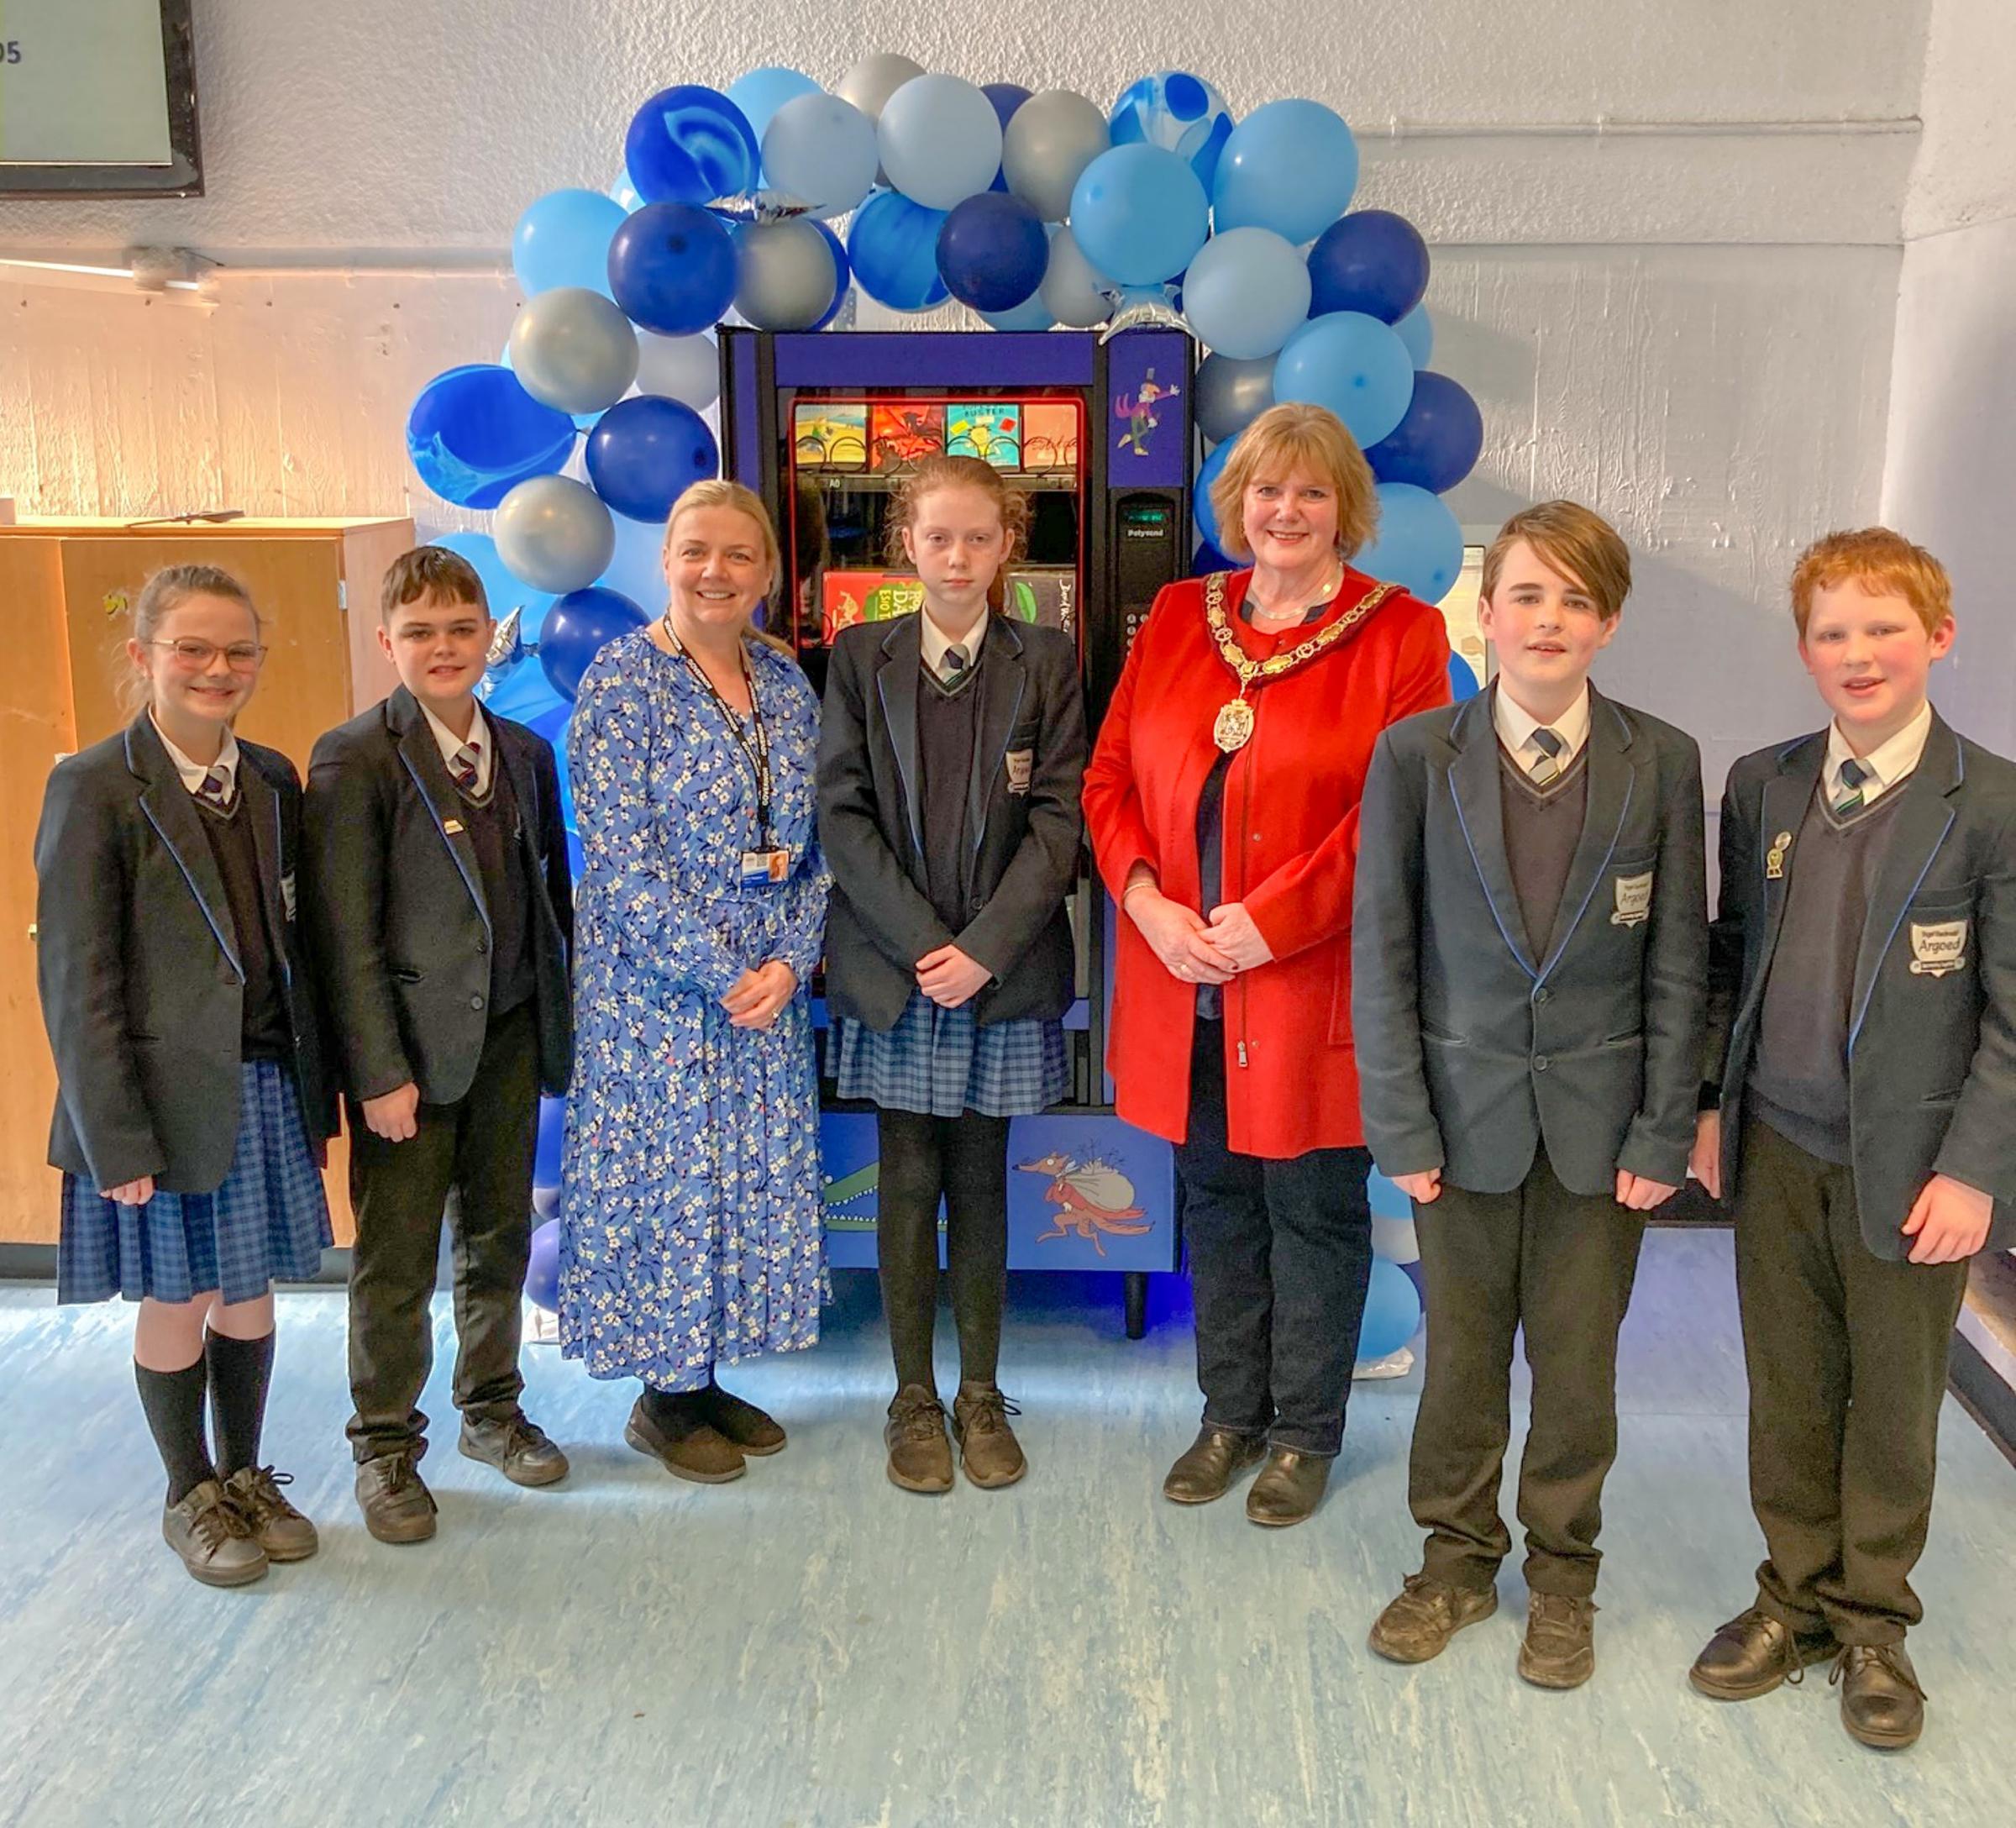 Laura Heywood and Cllr Mared Eastwood with students at the launch of the new book vending machine.